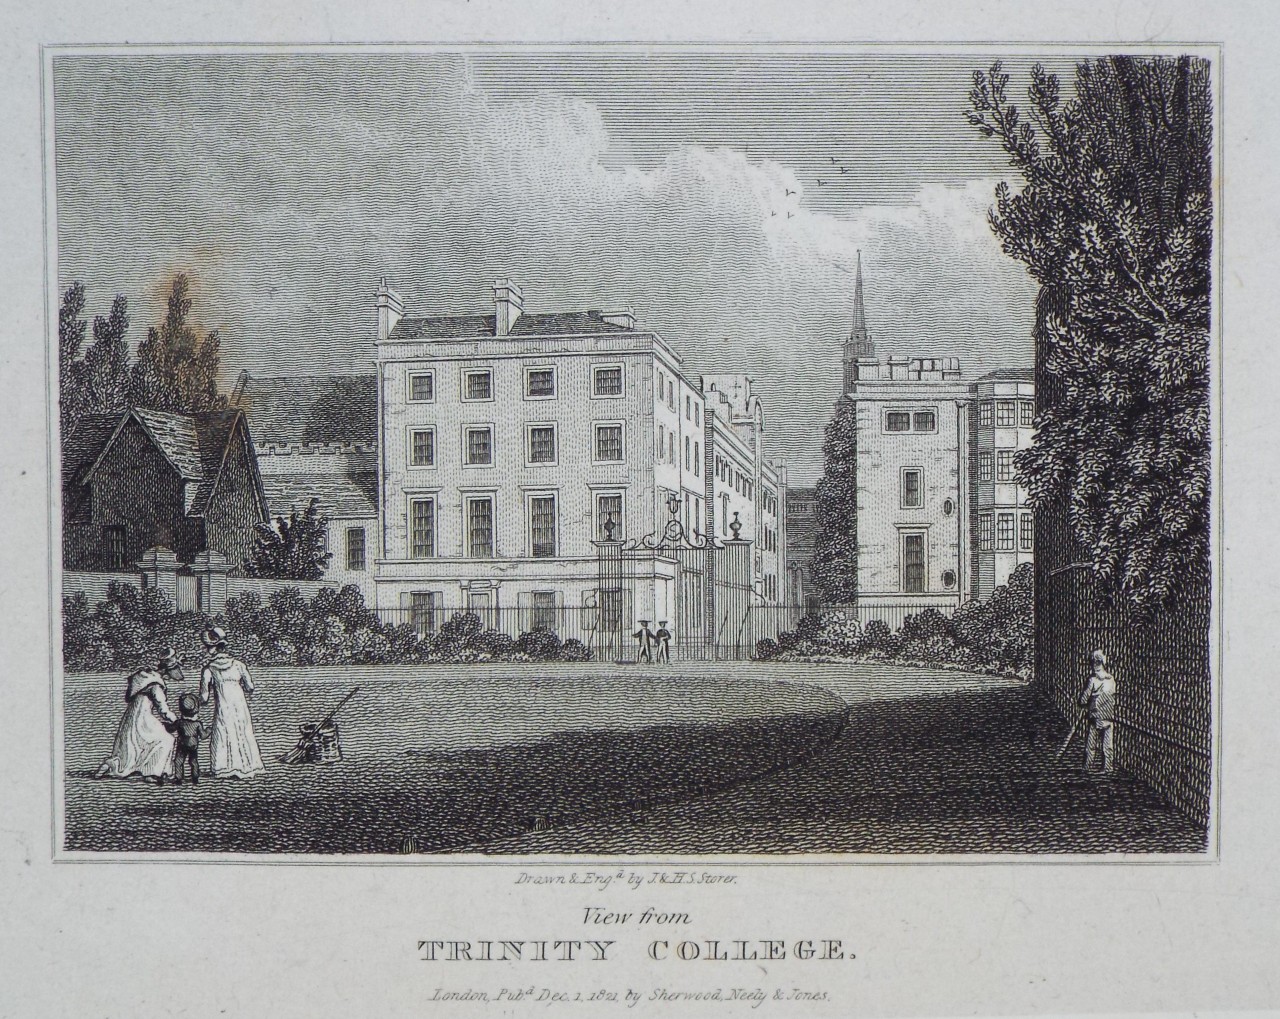 Print - View from Trinity College. - Storer